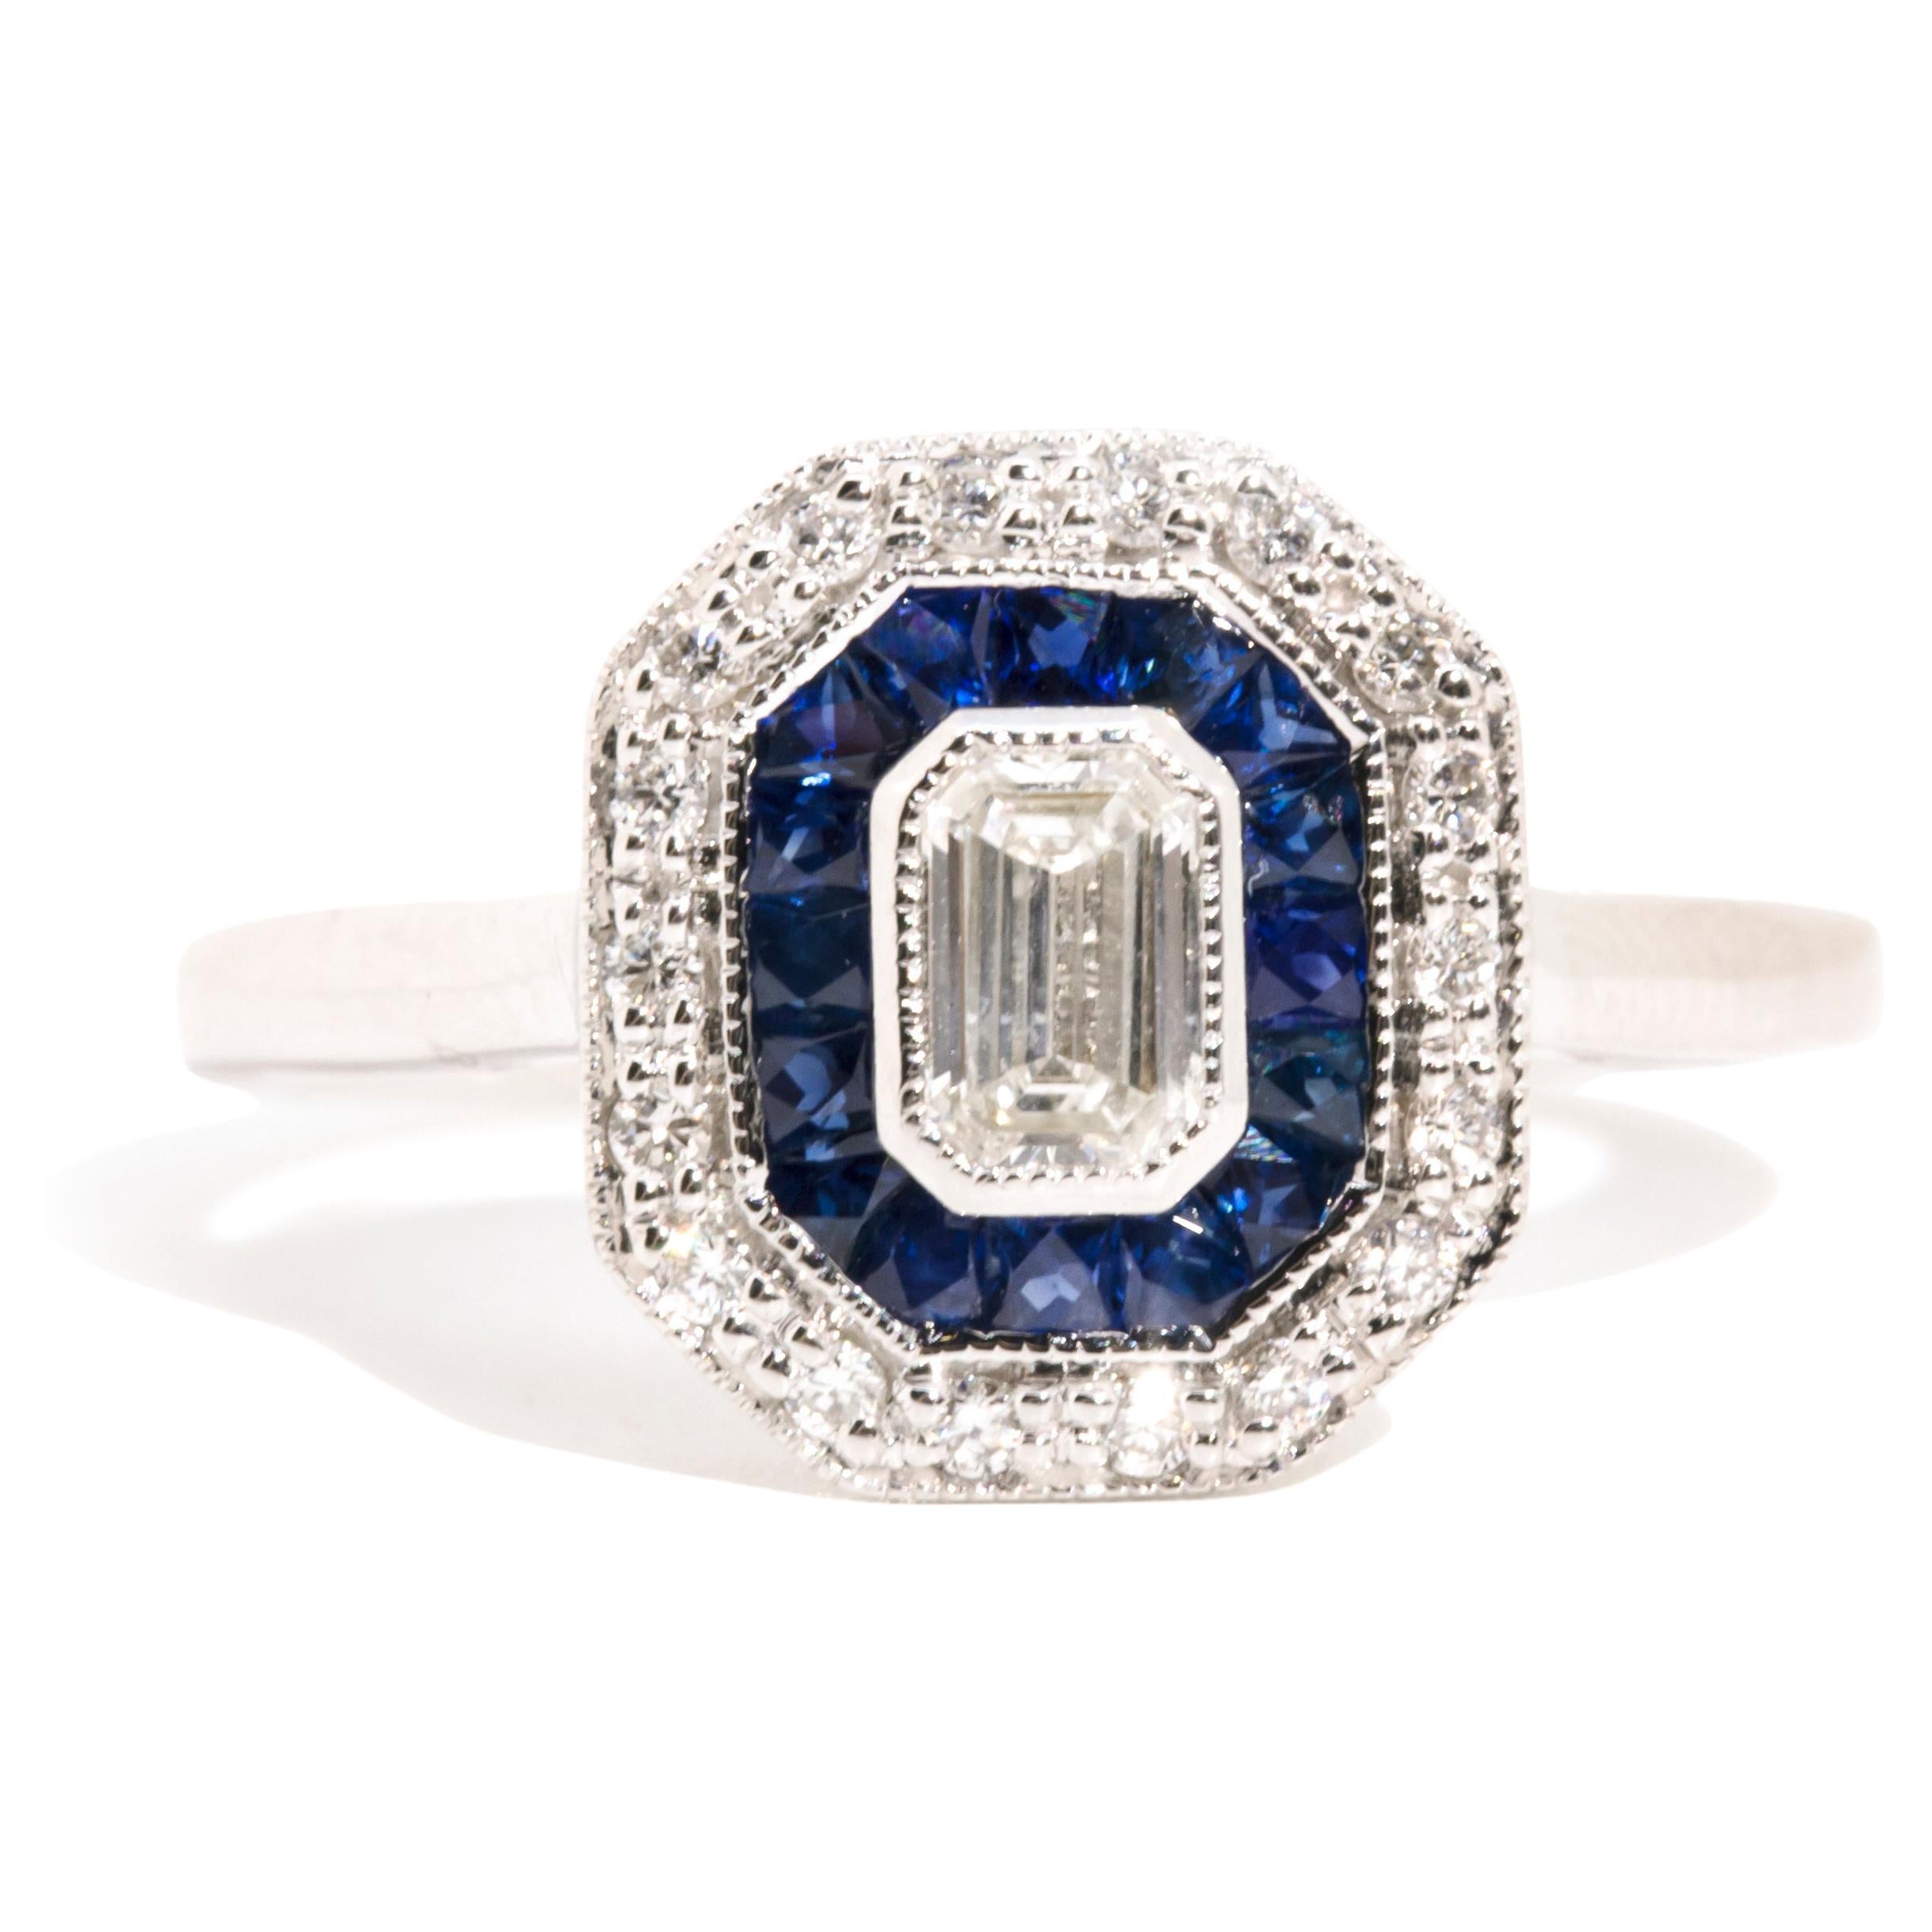 18 Carat Gold Emerald Cut Diamond and Blue Sapphire Contemporary Cluster Ring